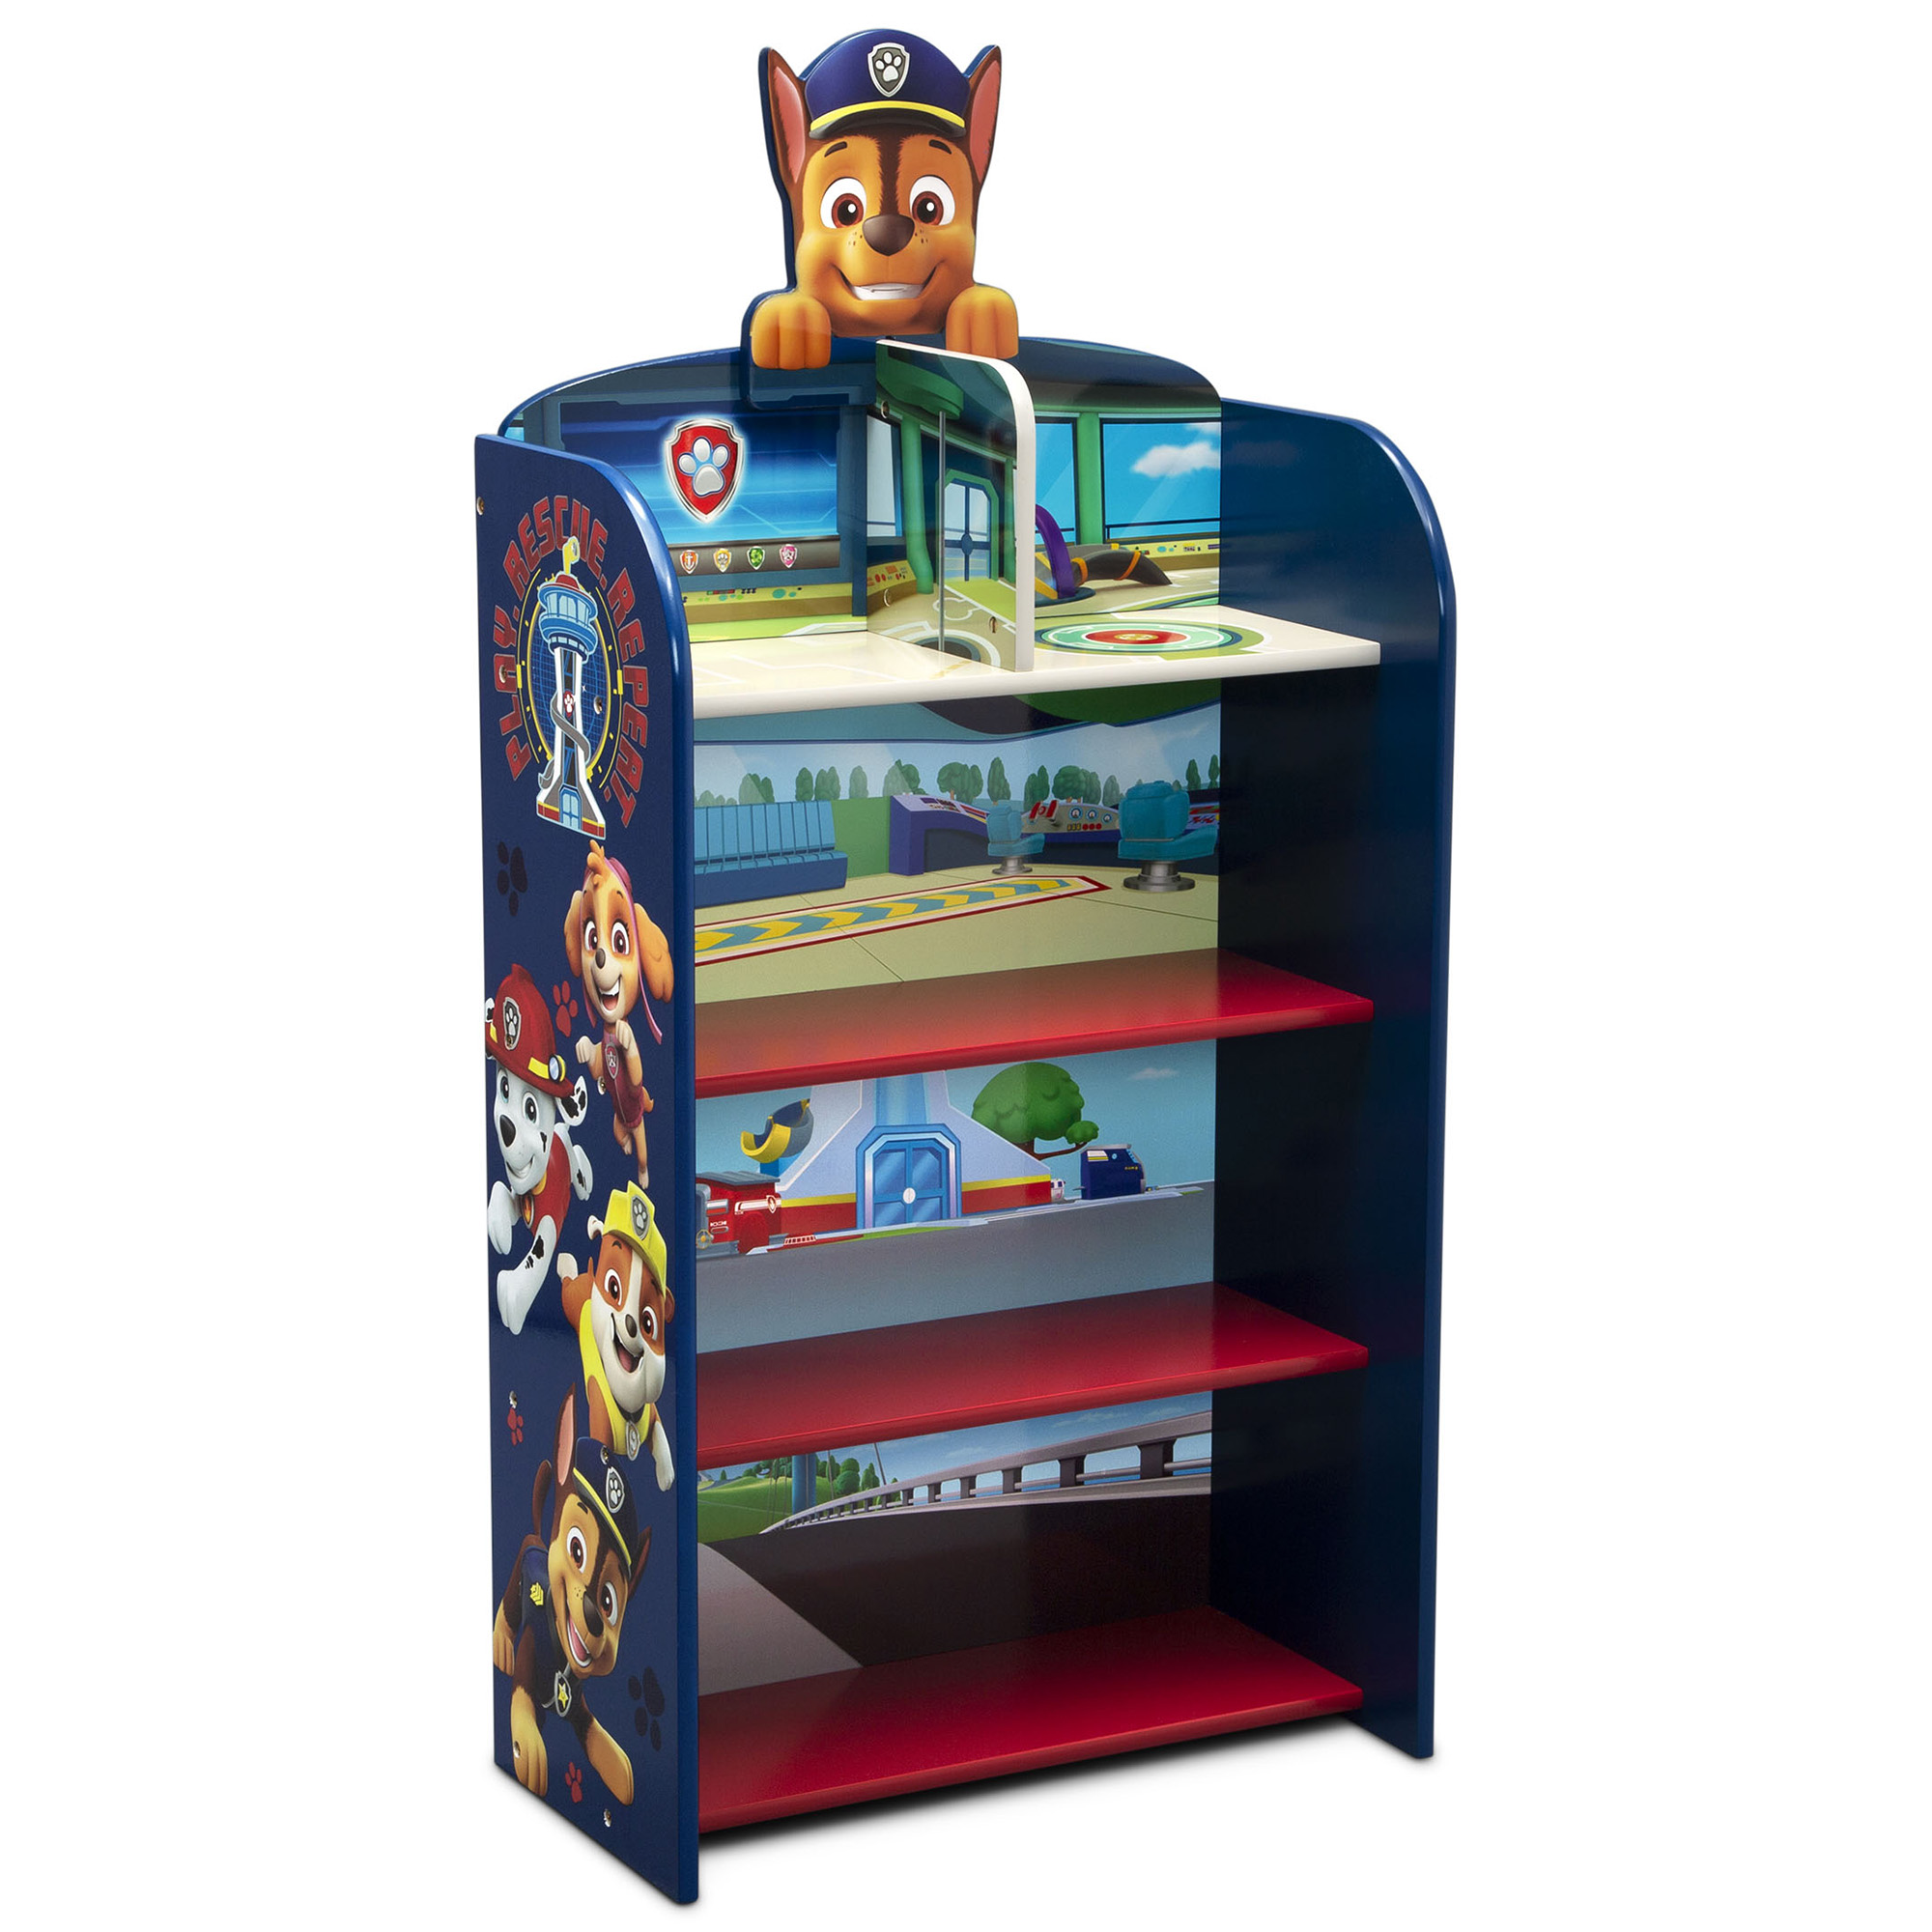 Nick Jr. PAW Patrol Wooden Playhouse 4-Shelf Bookcase for Kids by Delta Children, Greenguard Gold Certified - image 5 of 11